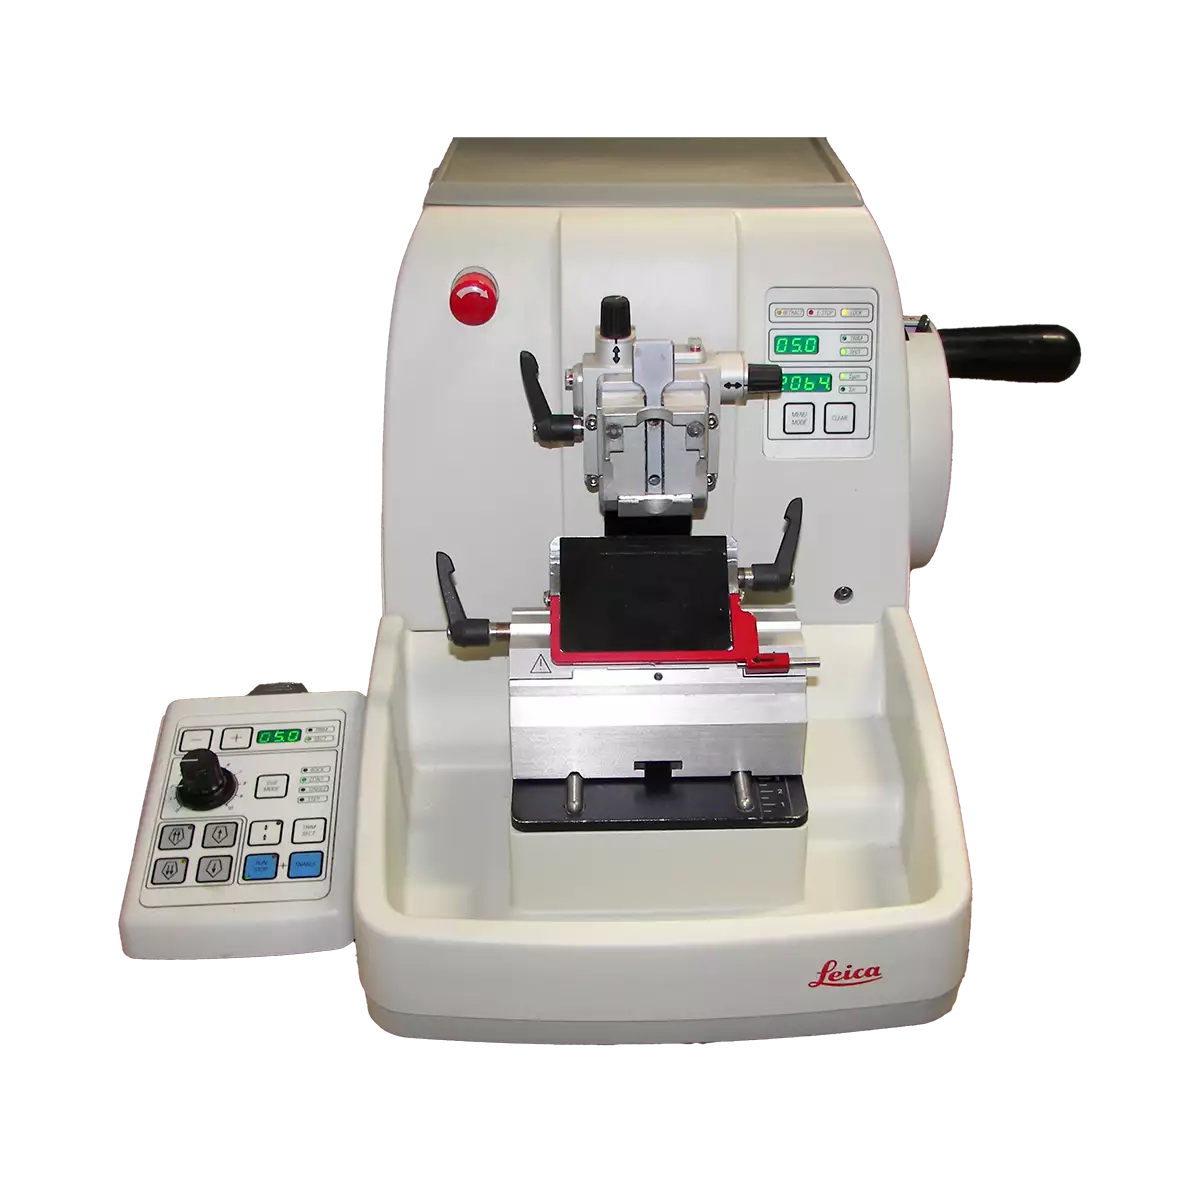 Remanufactured Leica 2225 Fully Motorized Rotary Microtome